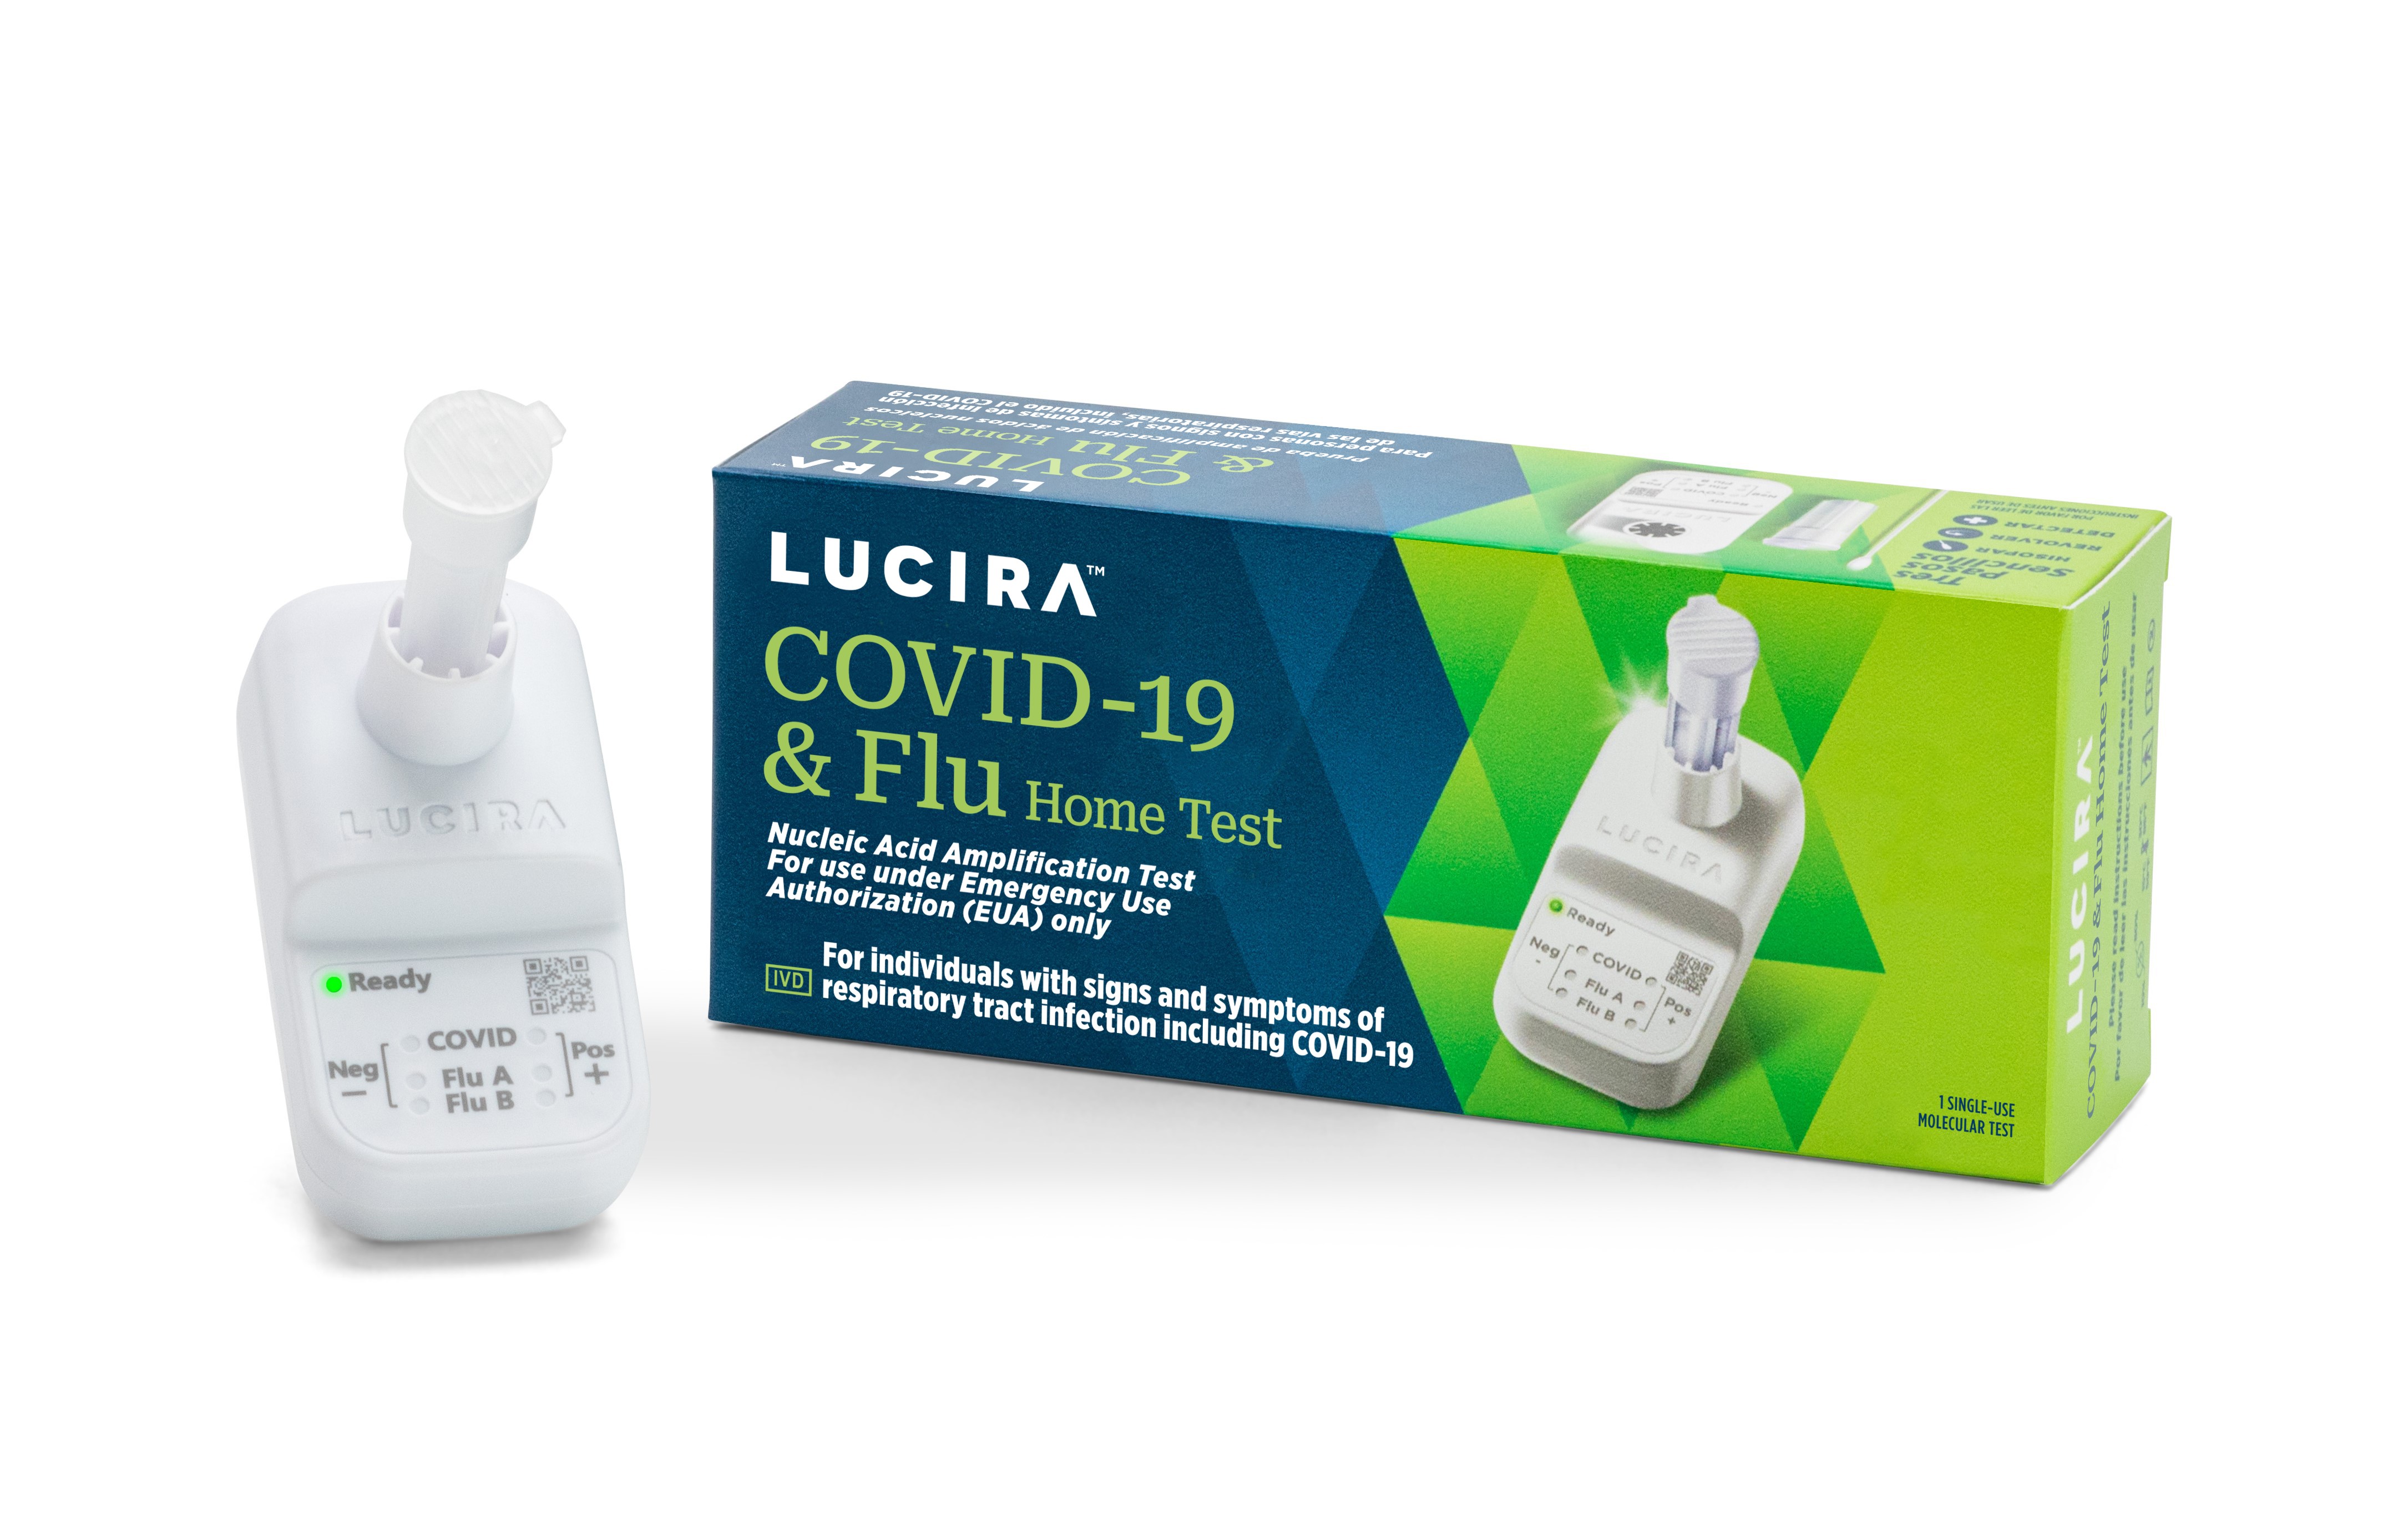 Lucira COVID-19 &amp; Flu Home Test – The First &amp; Only Combination Test for OTC Use At Home